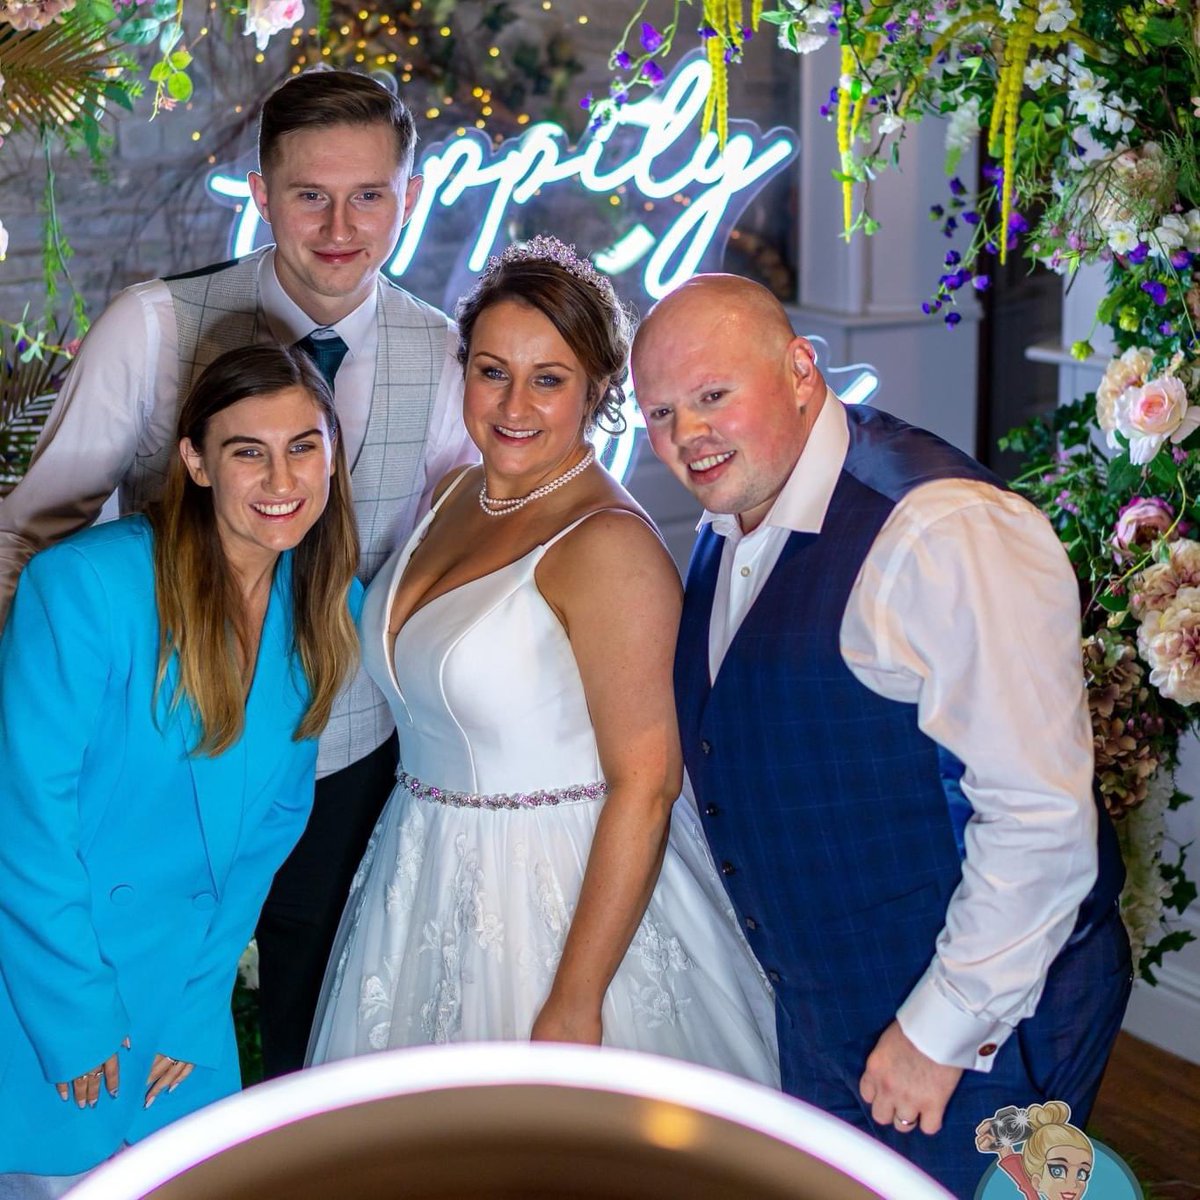 If you know someone who got engaged over Christmas, share our page so they can see all the unforgettable fun a photo booth brings to their reception!
#lgbtqwedding #lgbtqweddingvendor #weddingphotobooth #kcwedding #selfieboothrental #selfieboothfun #photoboothrental